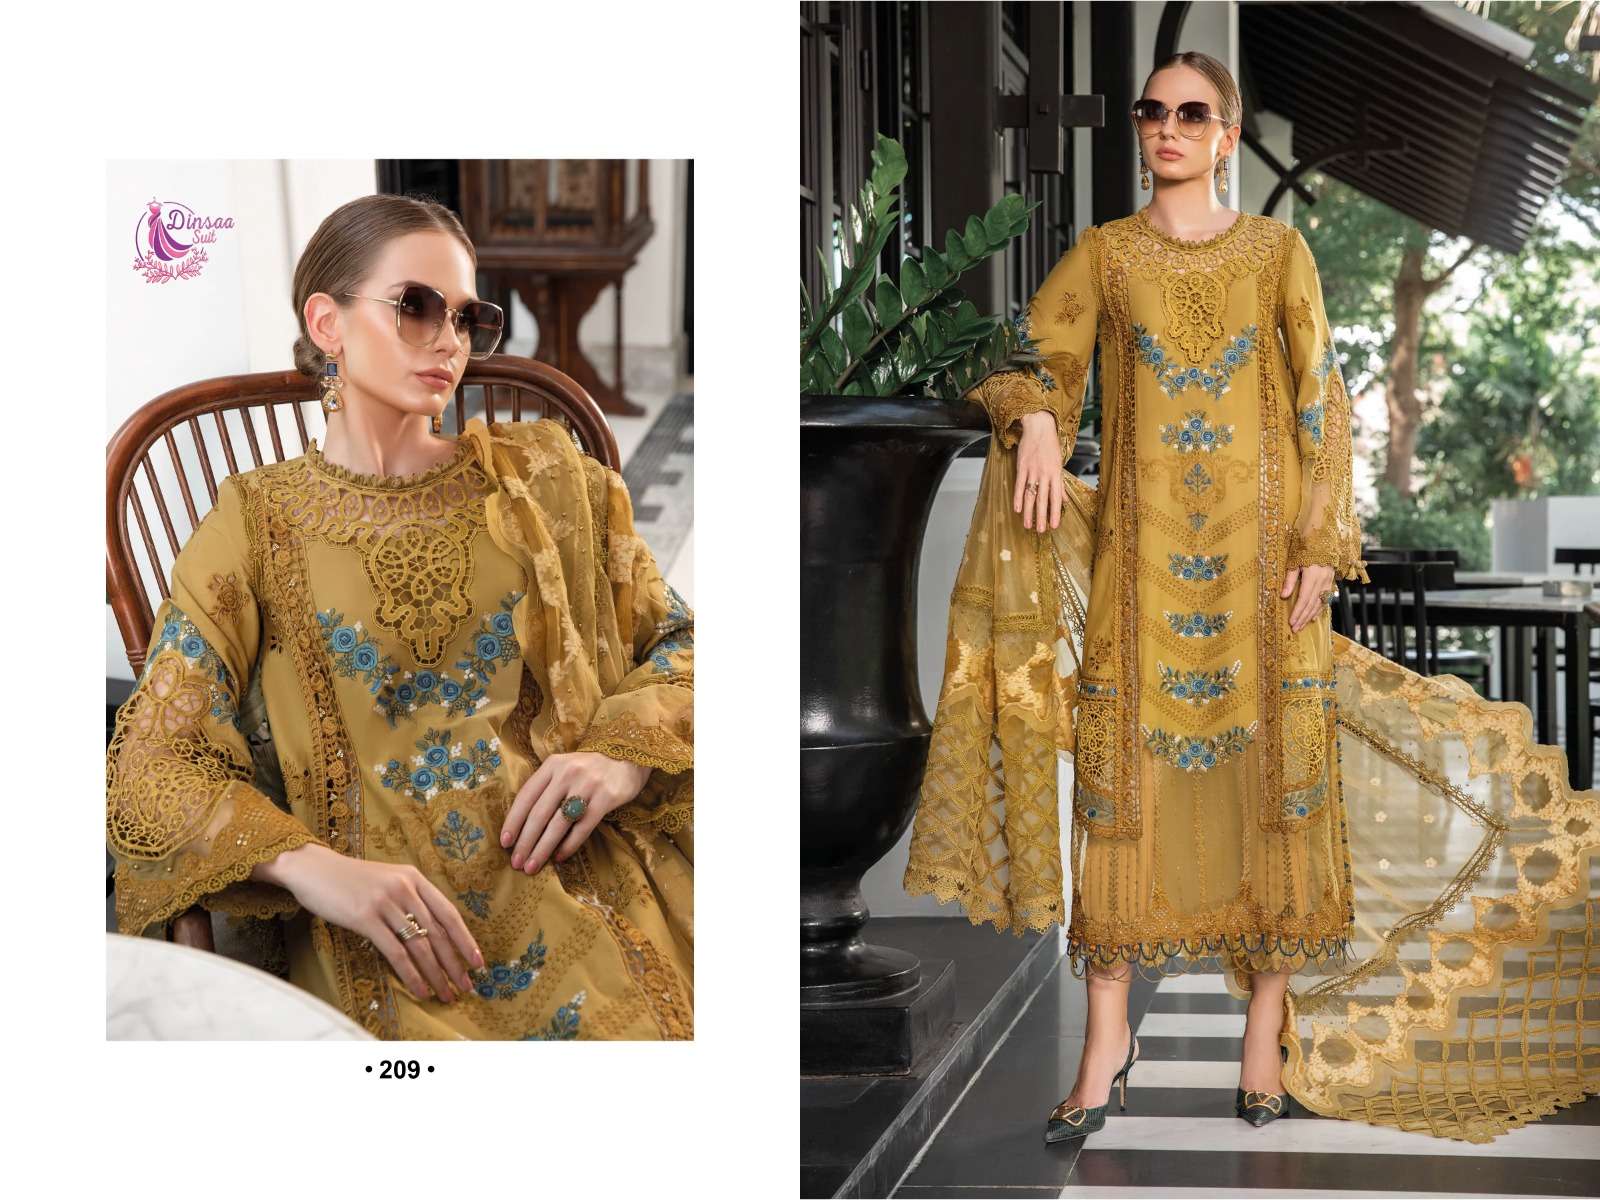 Maria.B. Vol-3 By Dinsaa Suits 208 To 210 Series Beautiful Pakistani Suits Colorful Stylish Fancy Casual Wear & Ethnic Wear Pure Cotton Embroidered Dresses At Wholesale Price